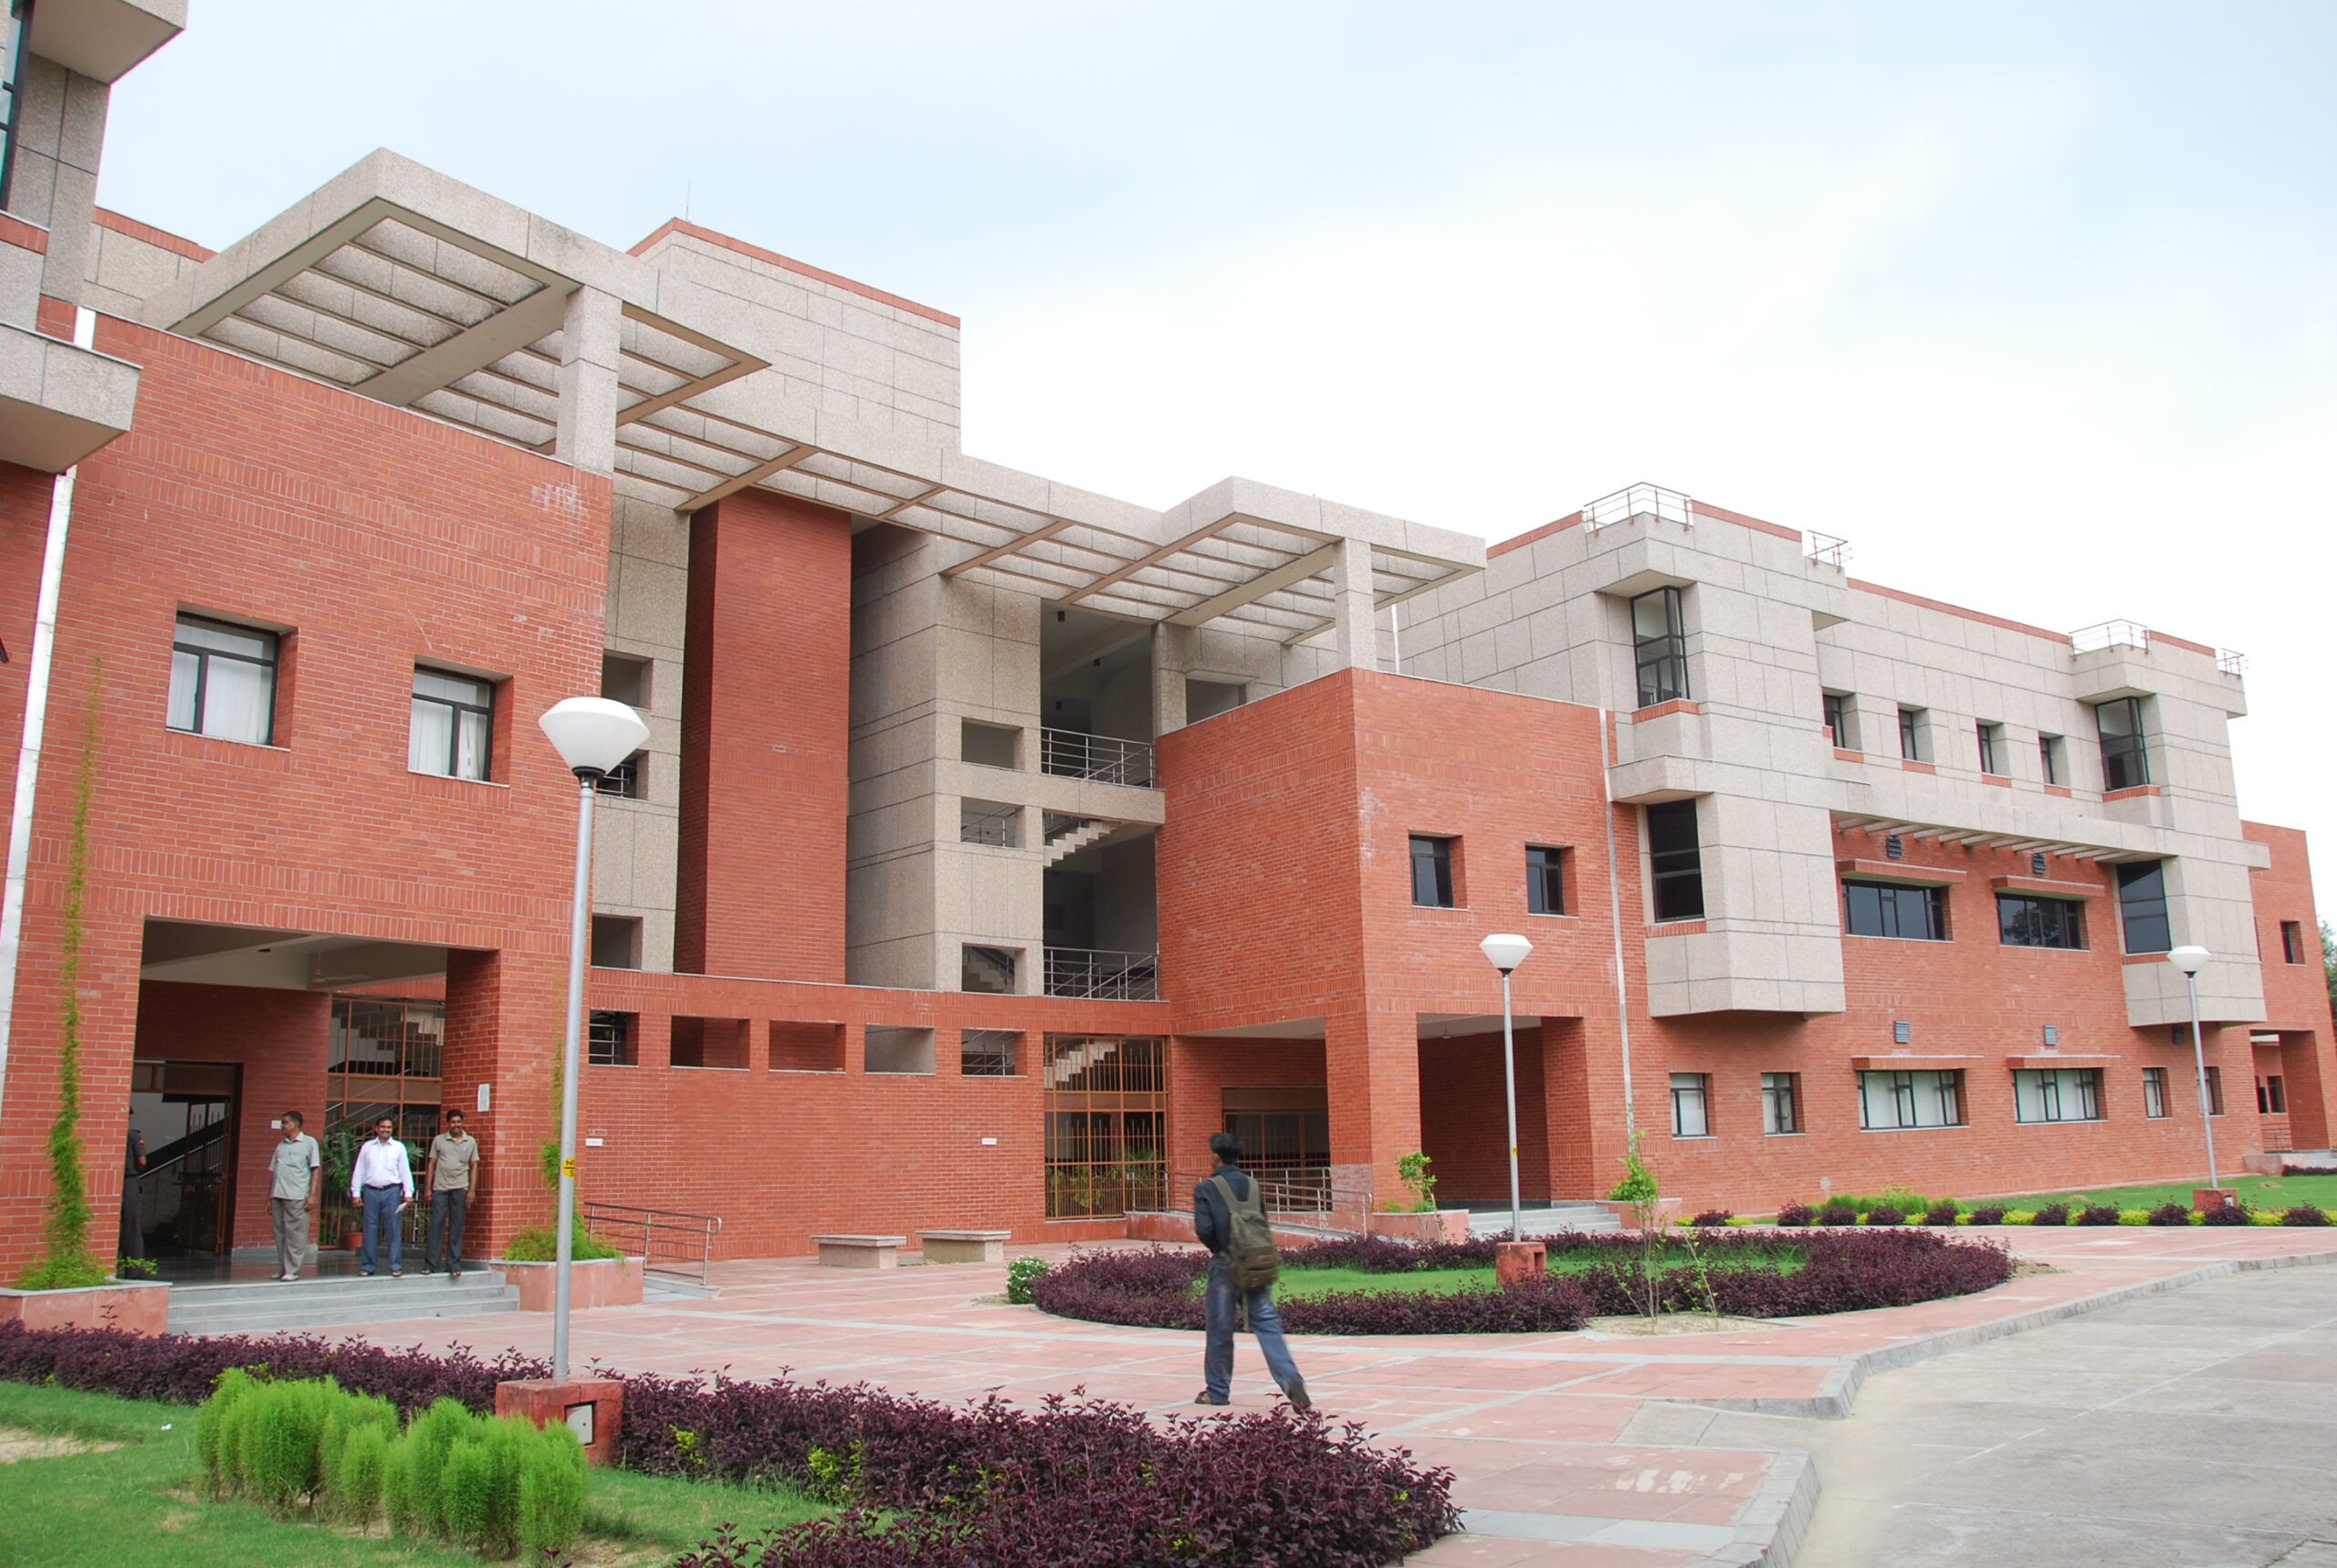 Main campus of Indian Institute Of Technology Kanpur